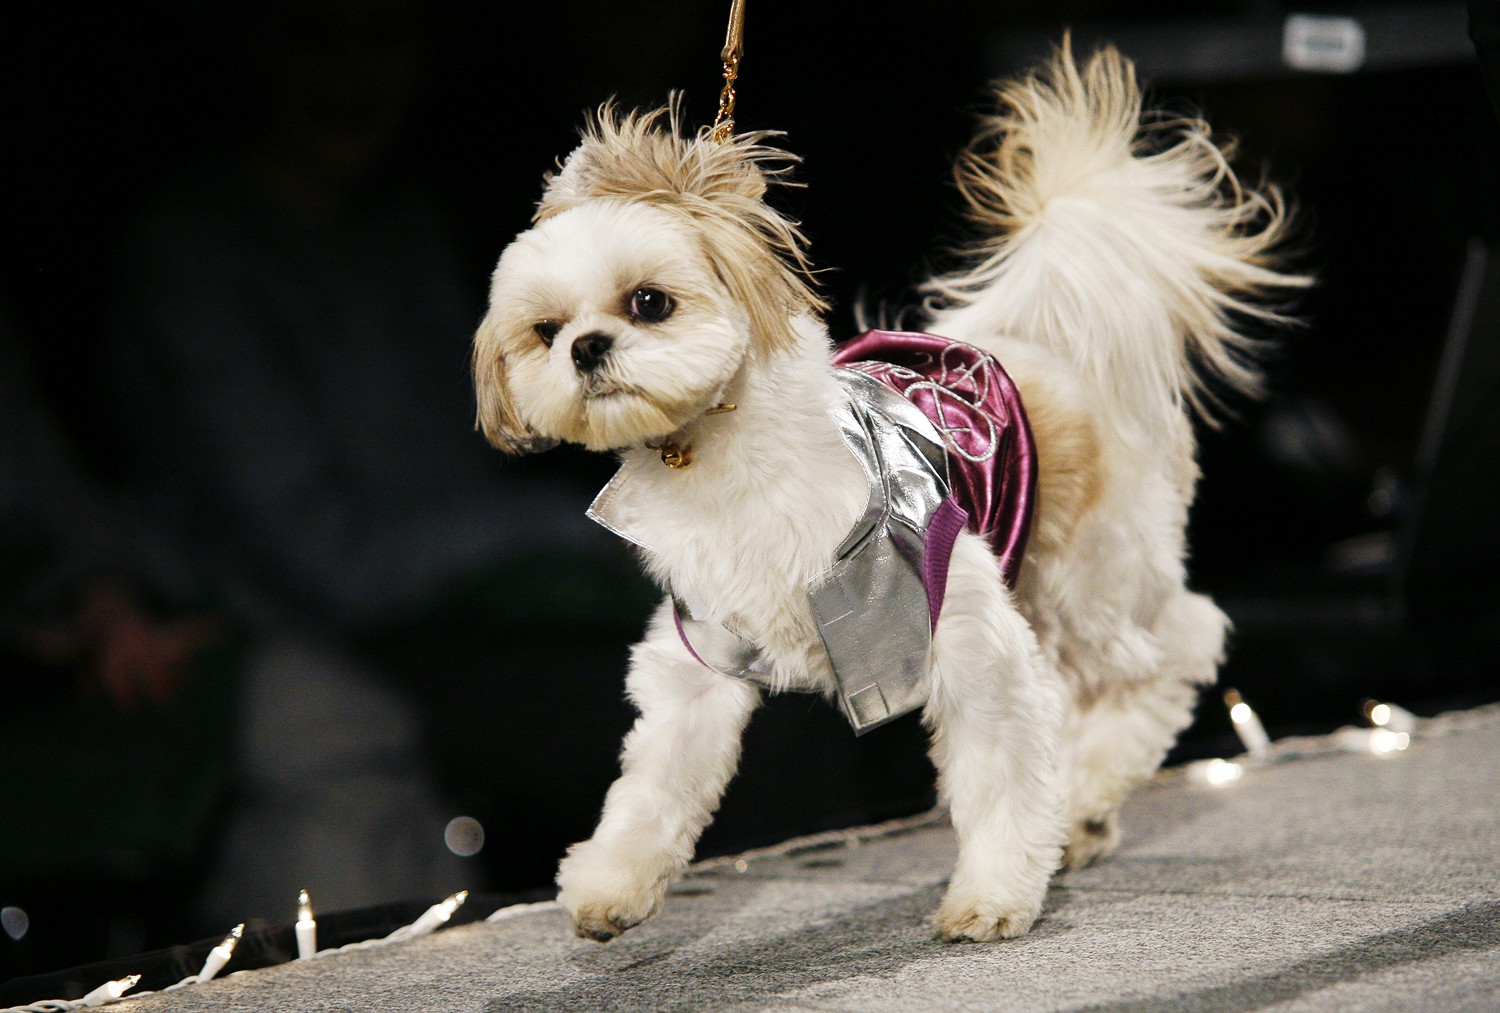 Stylish dogs rule the catwalks of Shanghai's streets